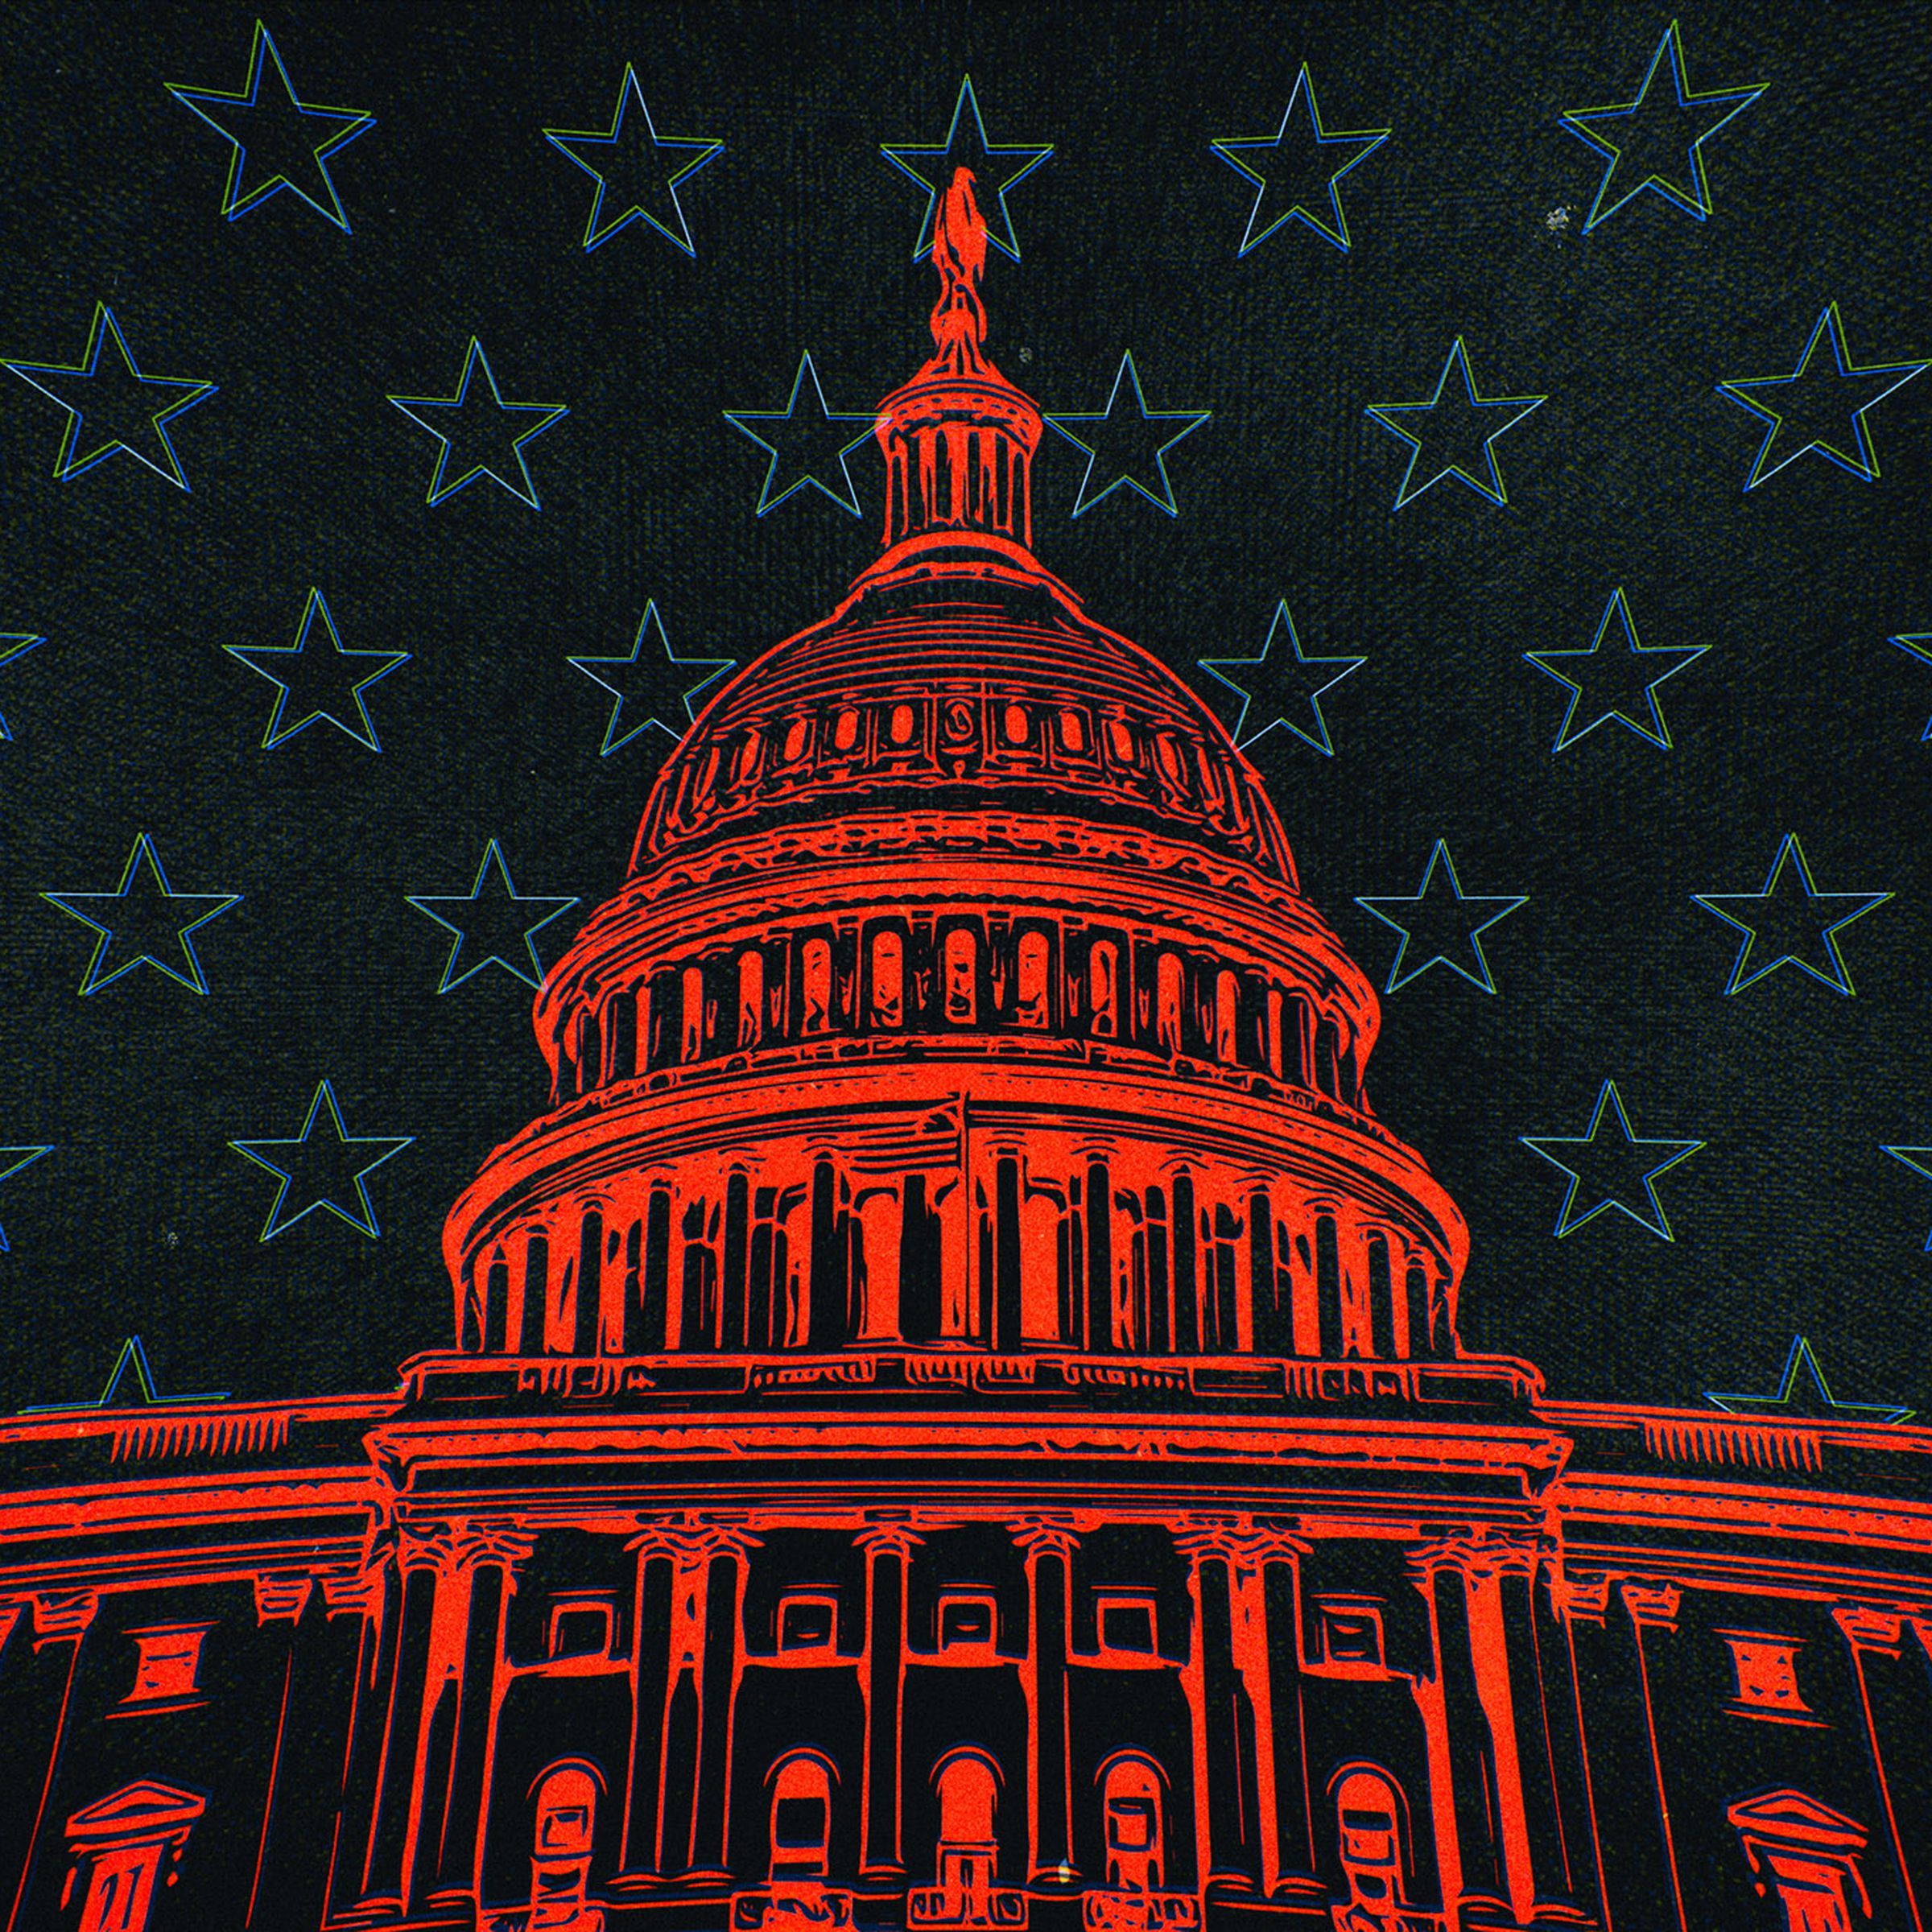 The image is an illustration of the US Capitol building overlaid on a star patterned background.